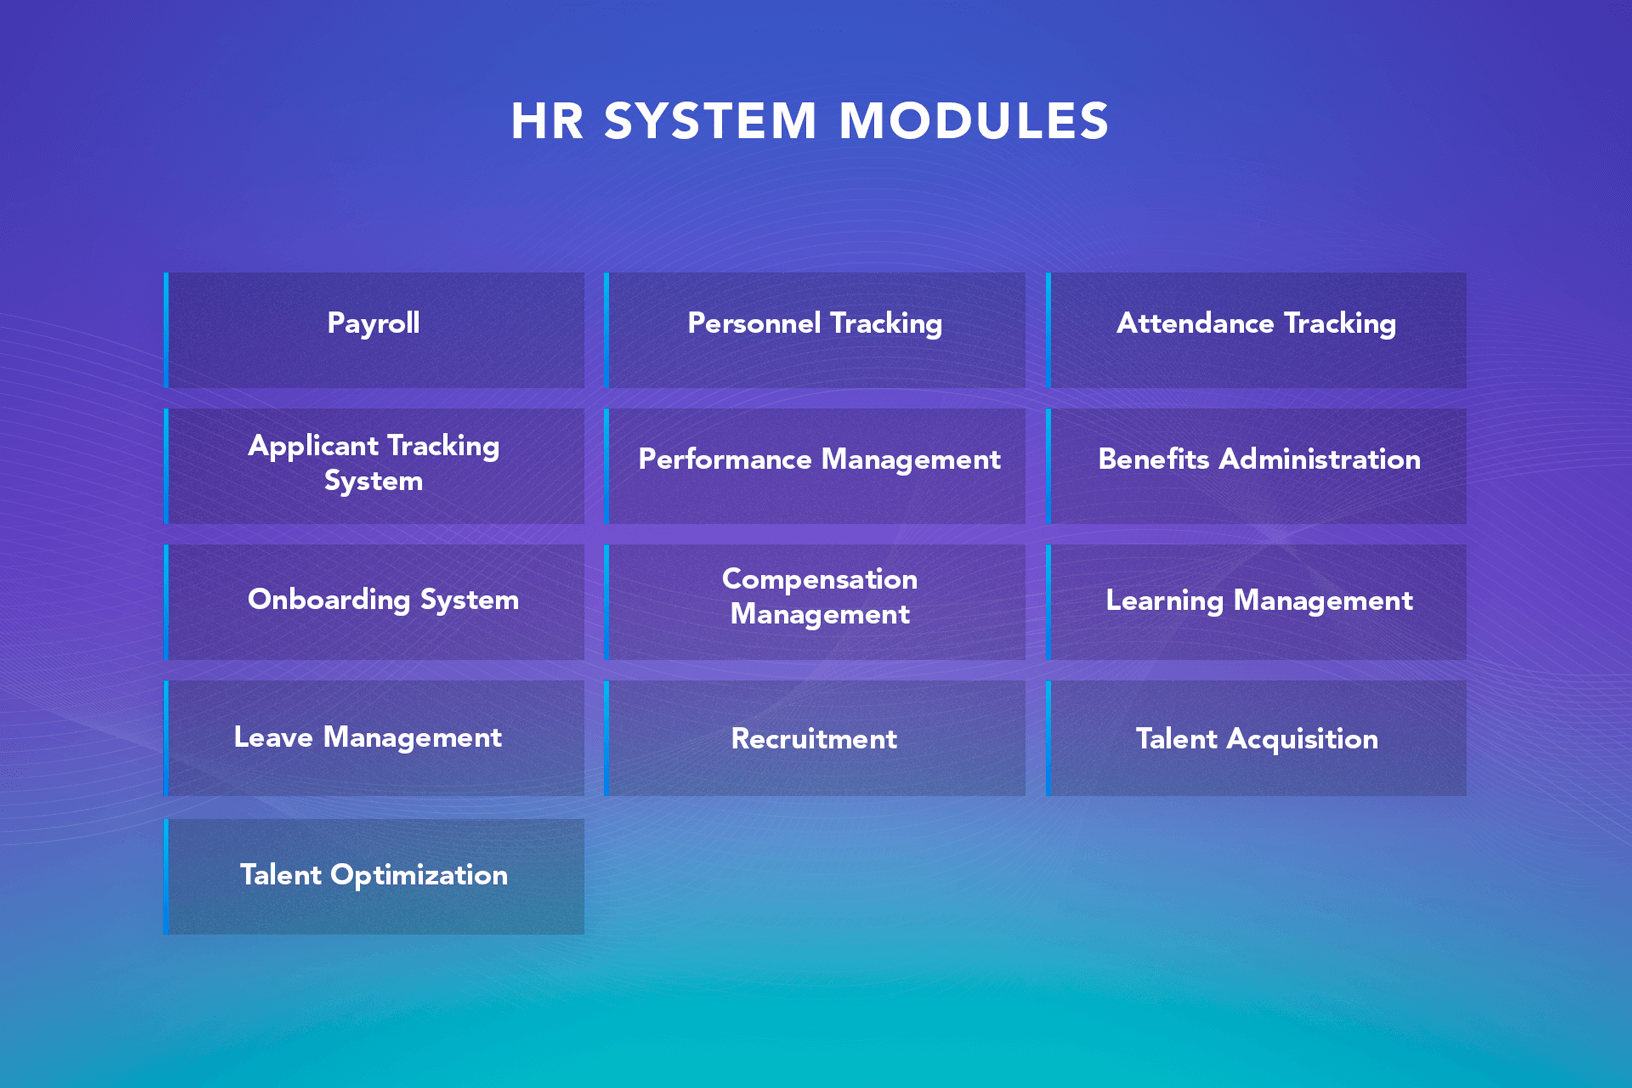 HR Management Software: Modules to apply